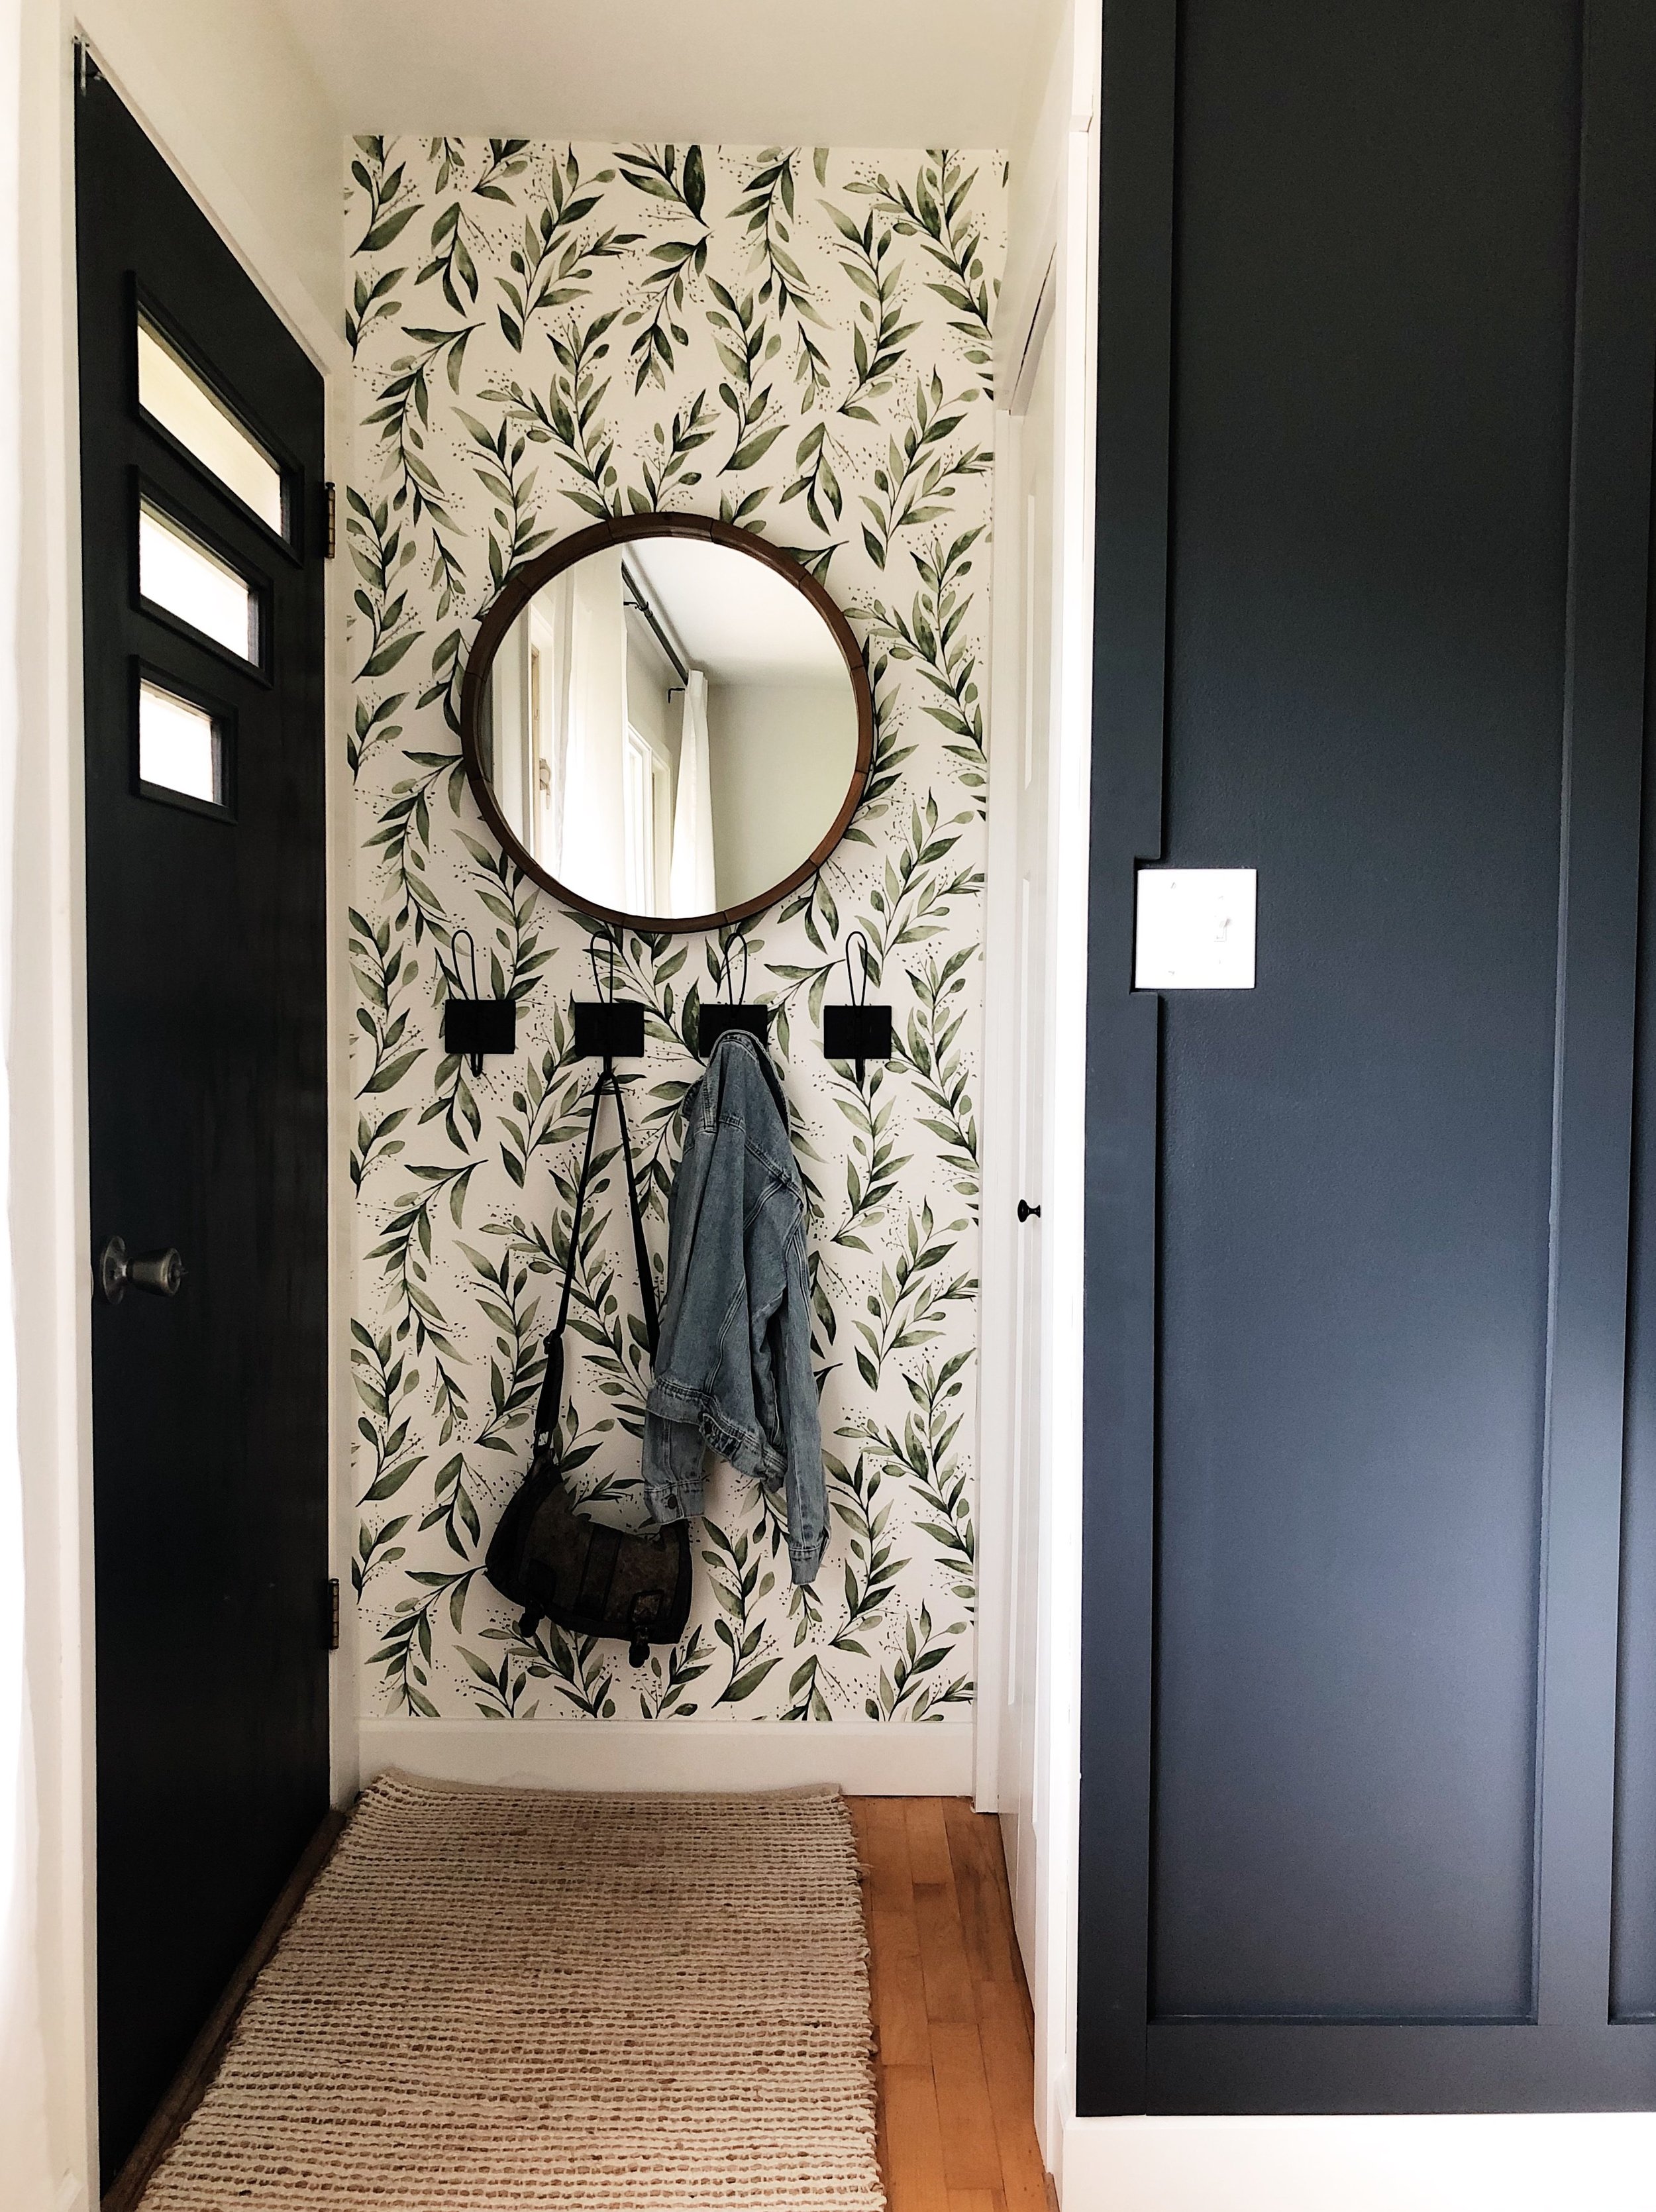 Our New Entryway Wallpaper How To Install It Plus A Magnolia